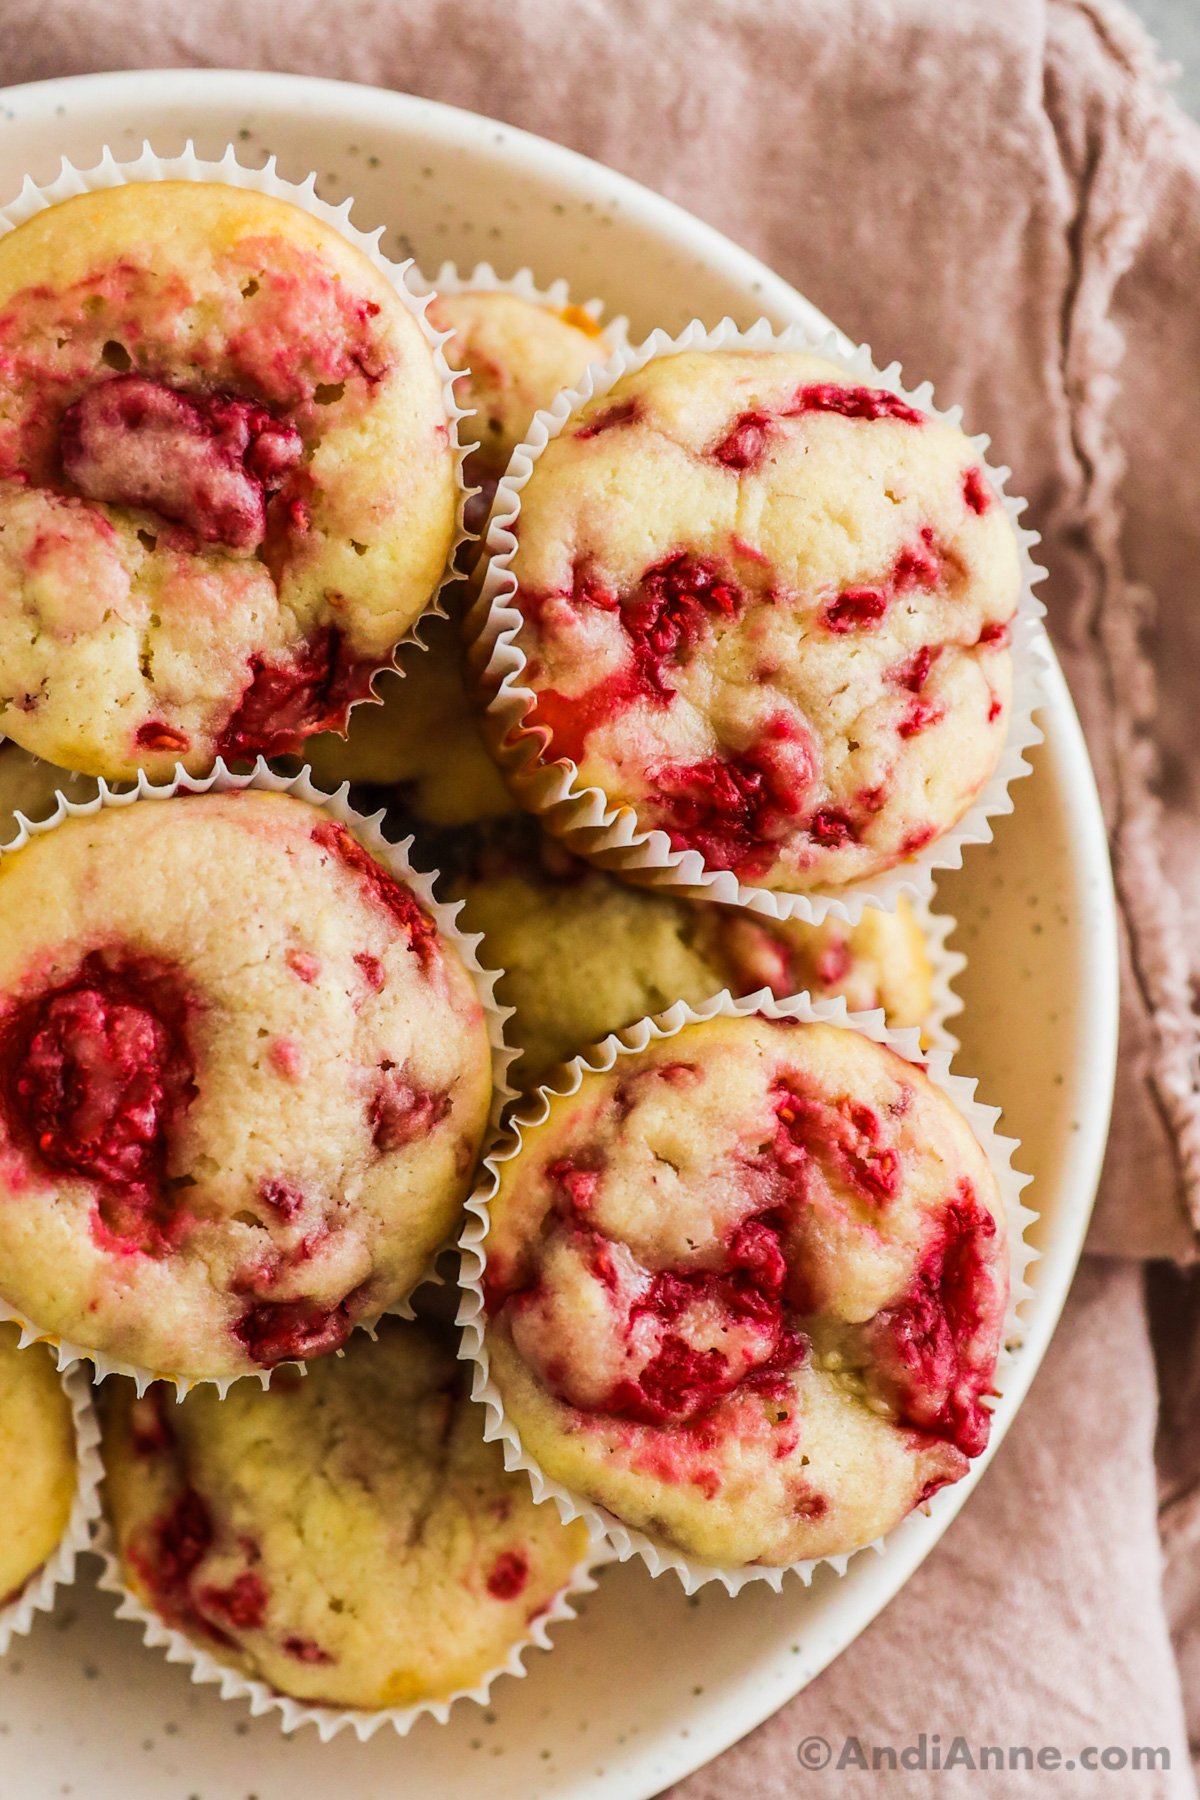 A pile of raspberry muffins on a plate.